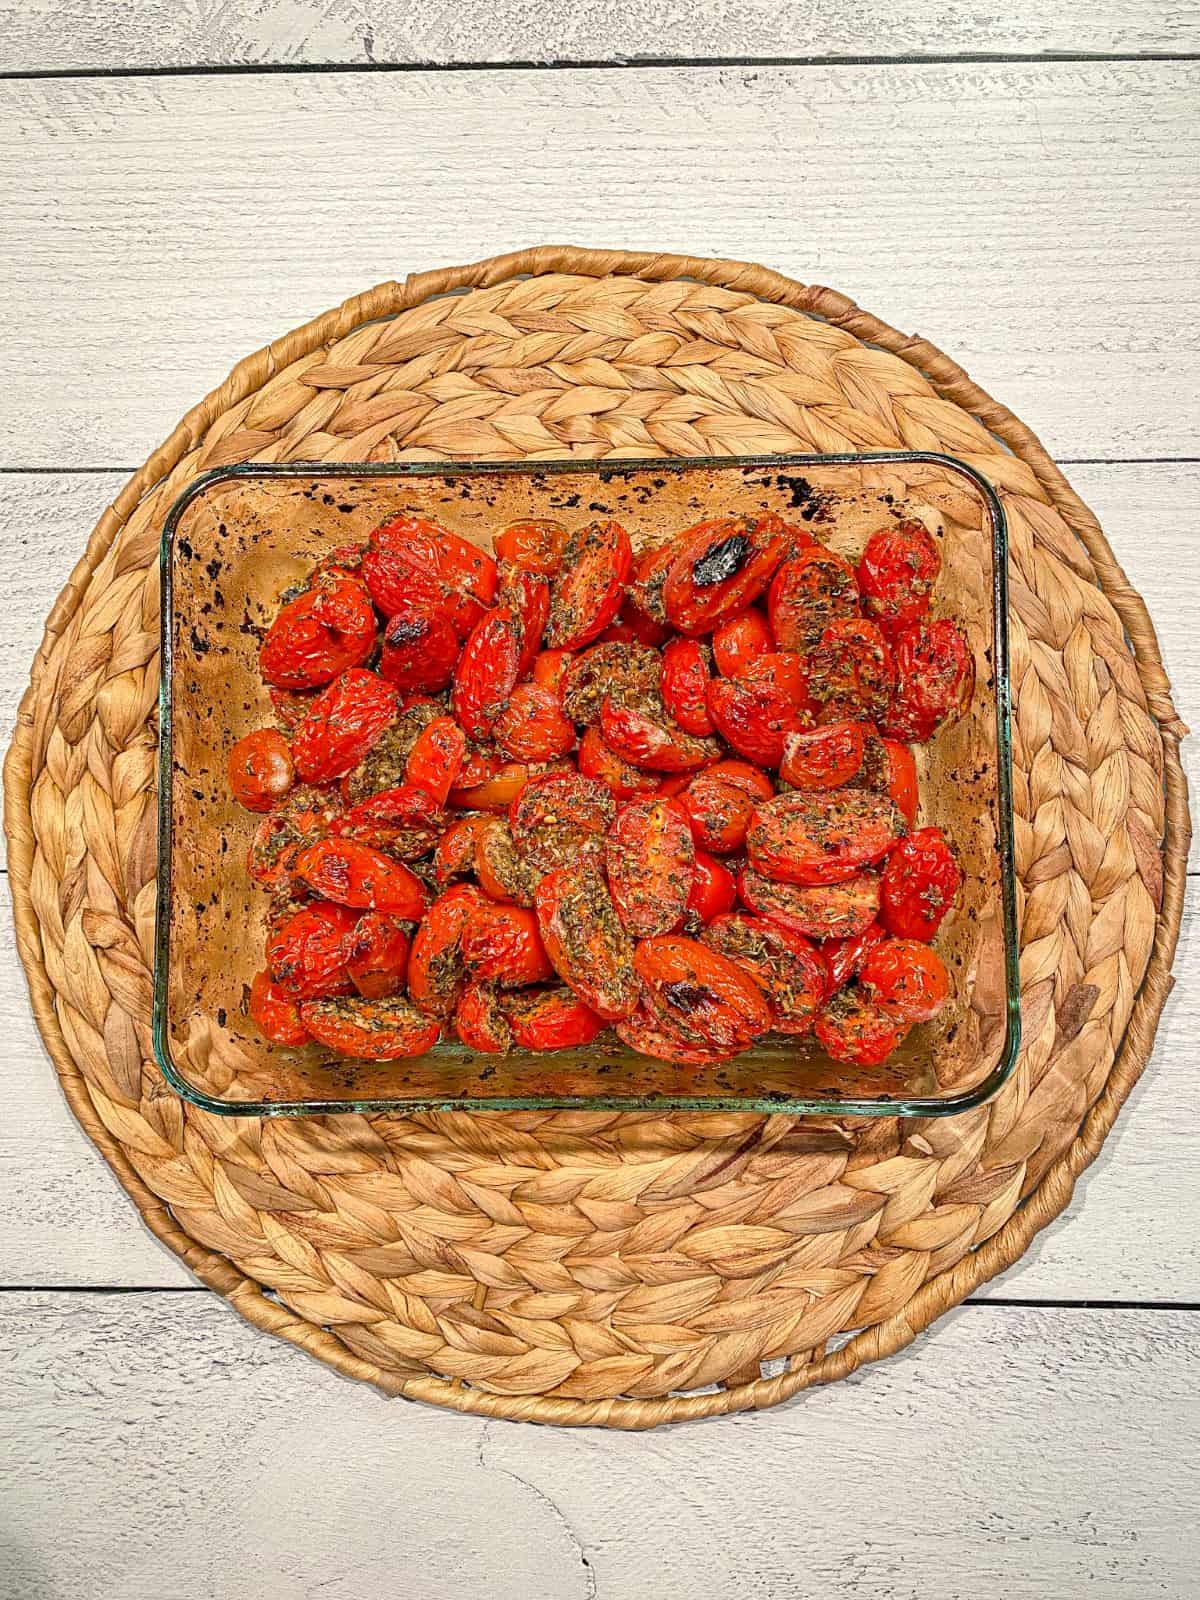 Roasted cherry tomatoes in a baking dish. Tomatoes are blistered and seasoned with Italian seasoning.